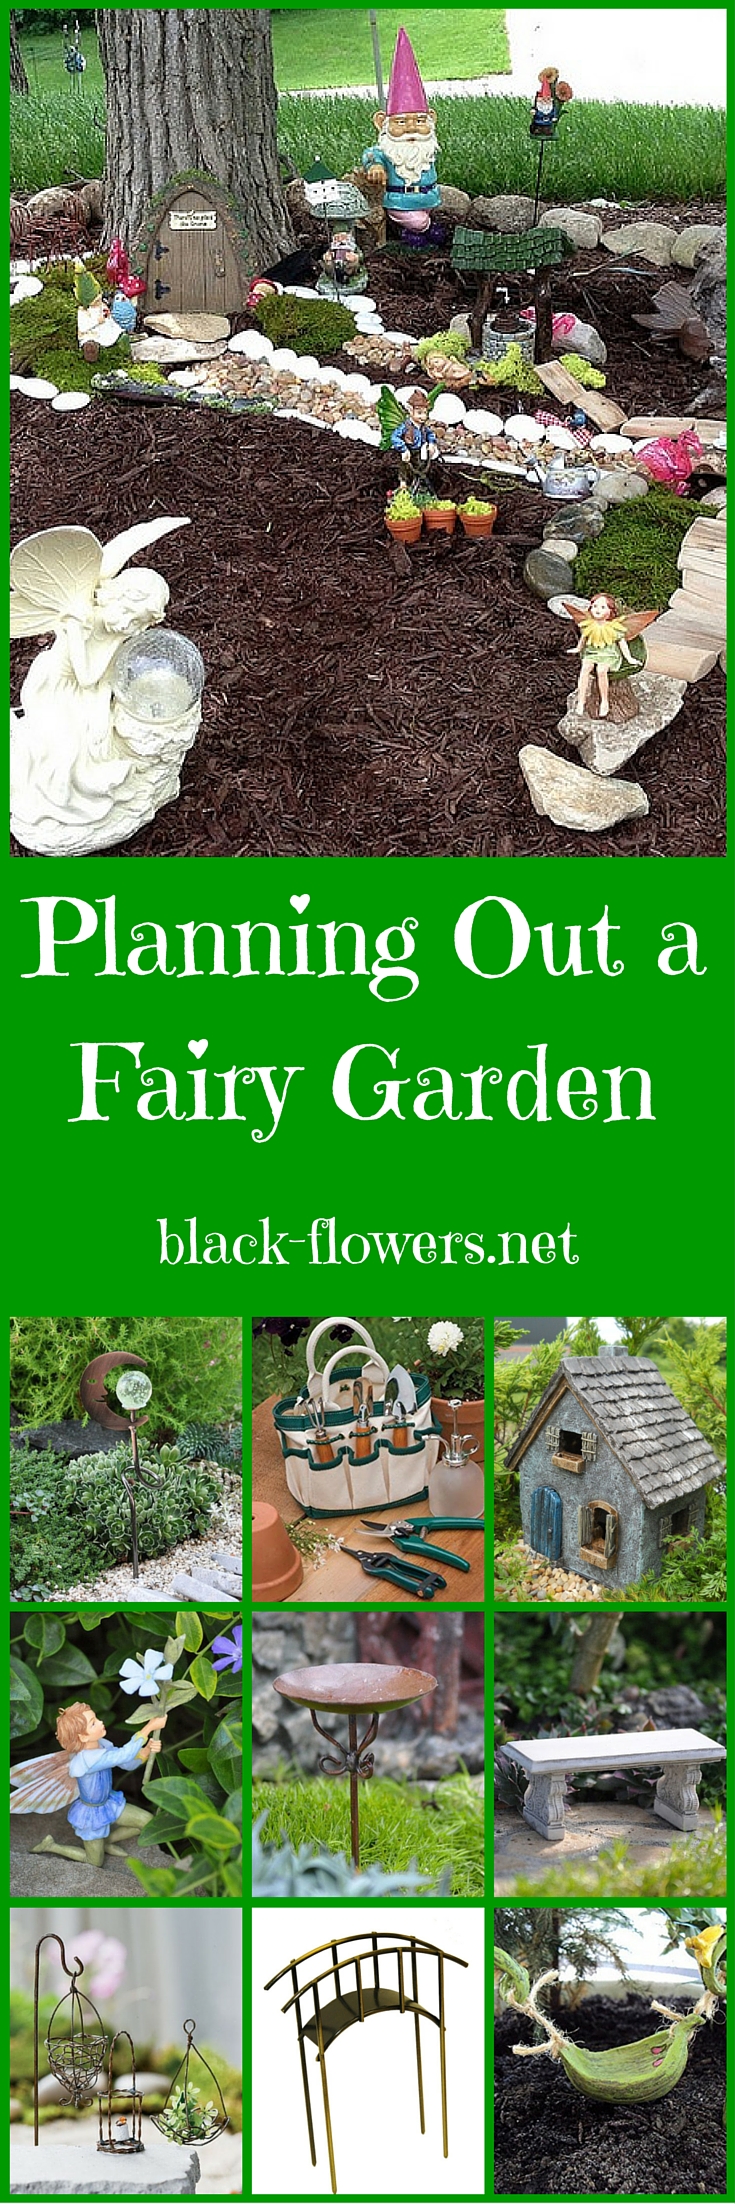 Planning Out a Fairy Garden